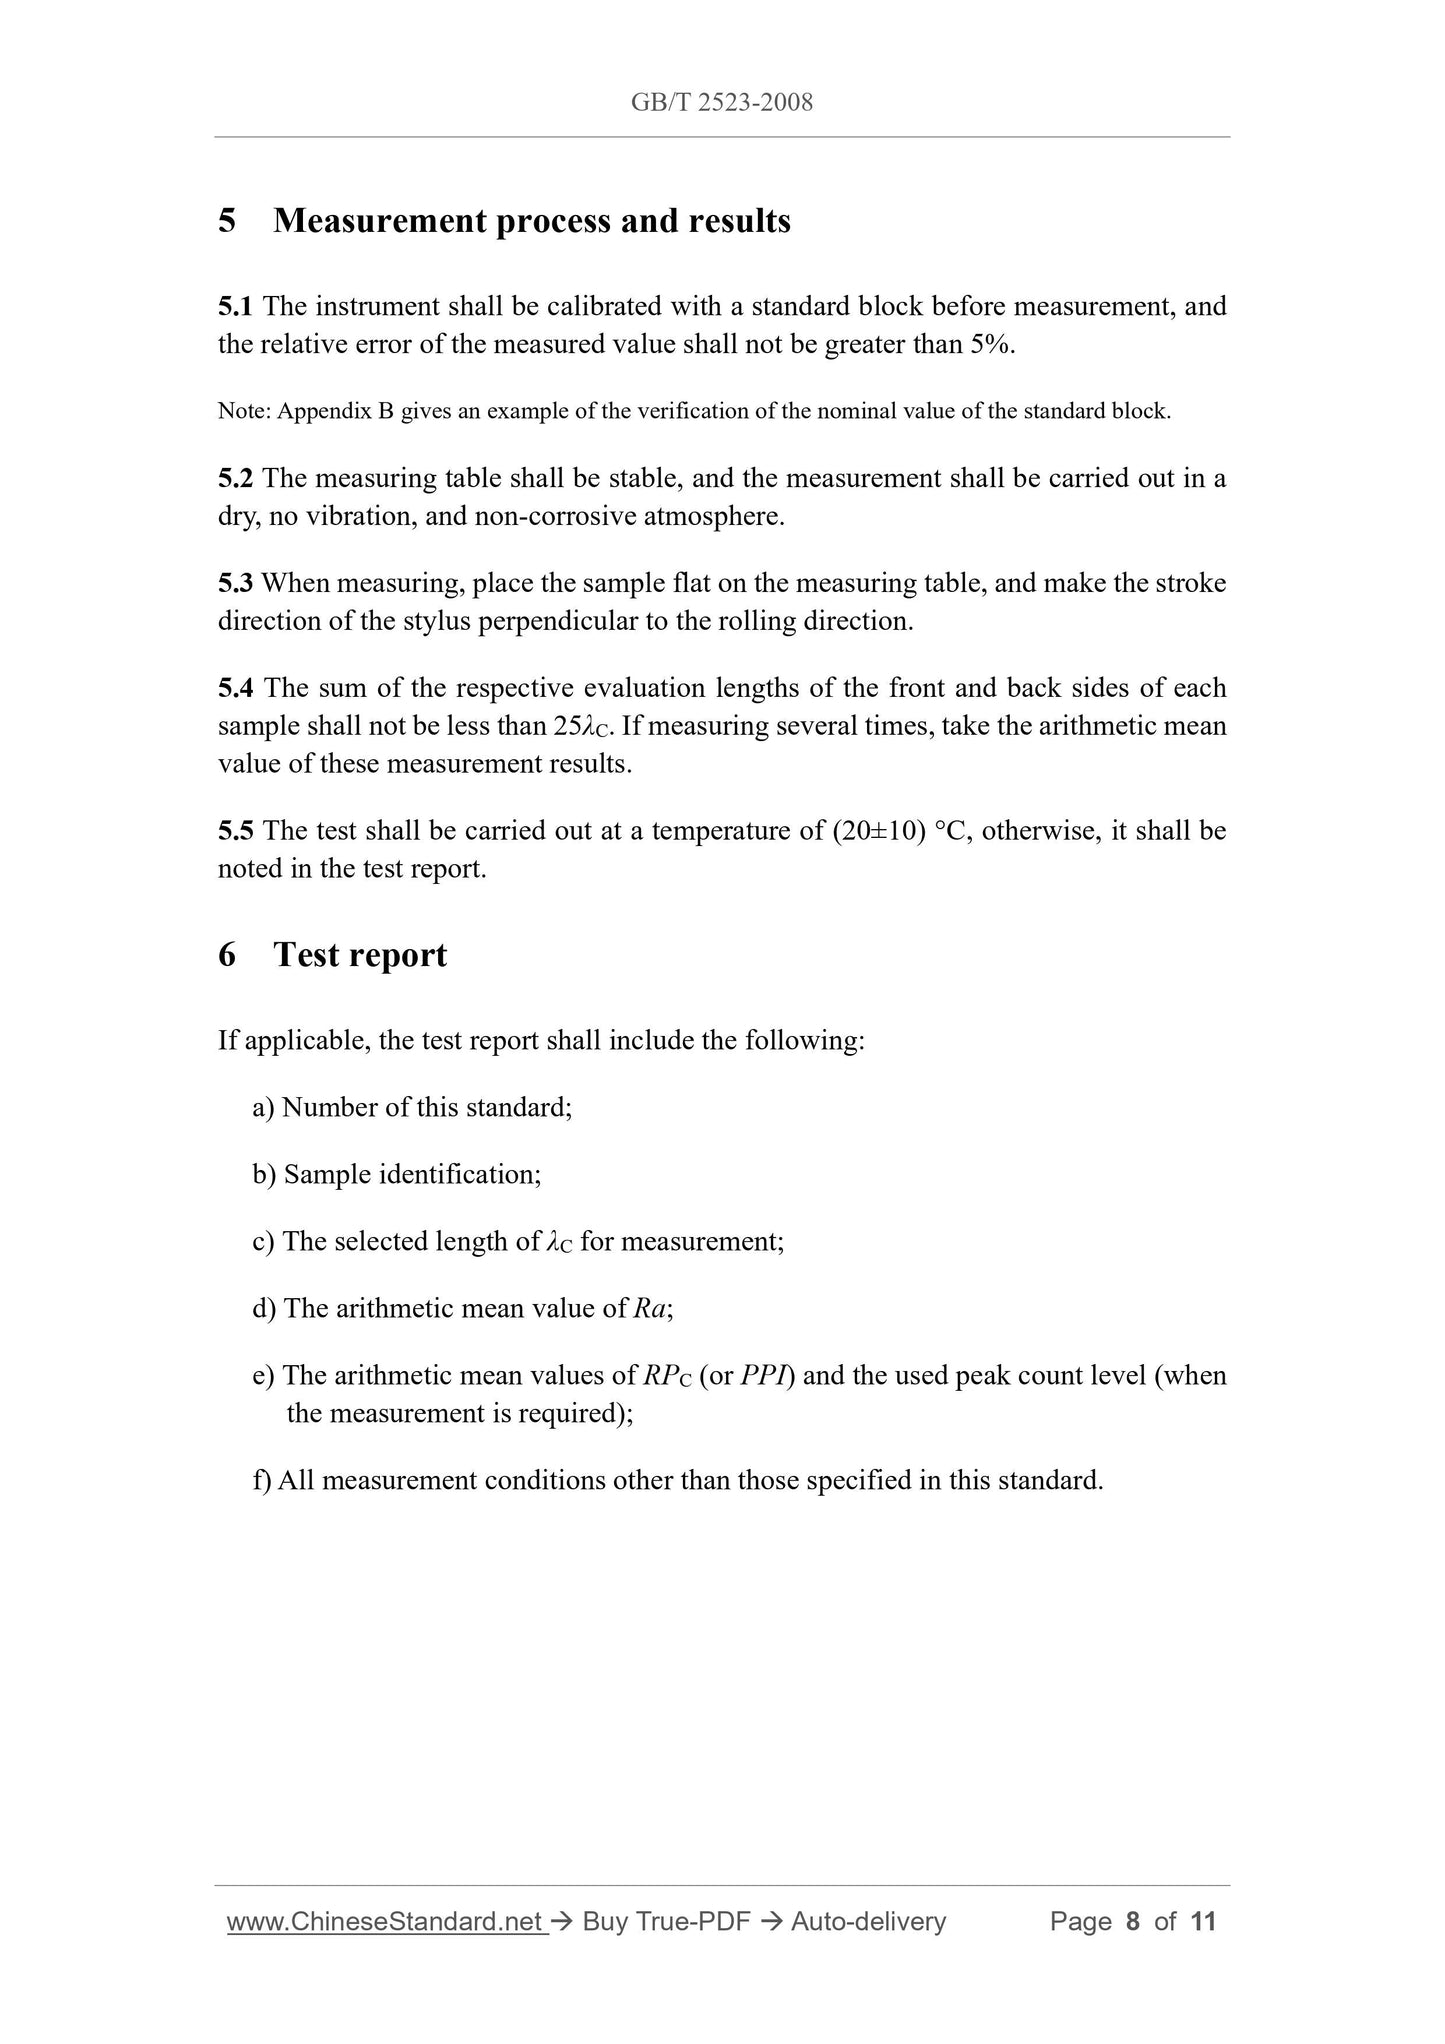 GB/T 2523-2008 Page 4